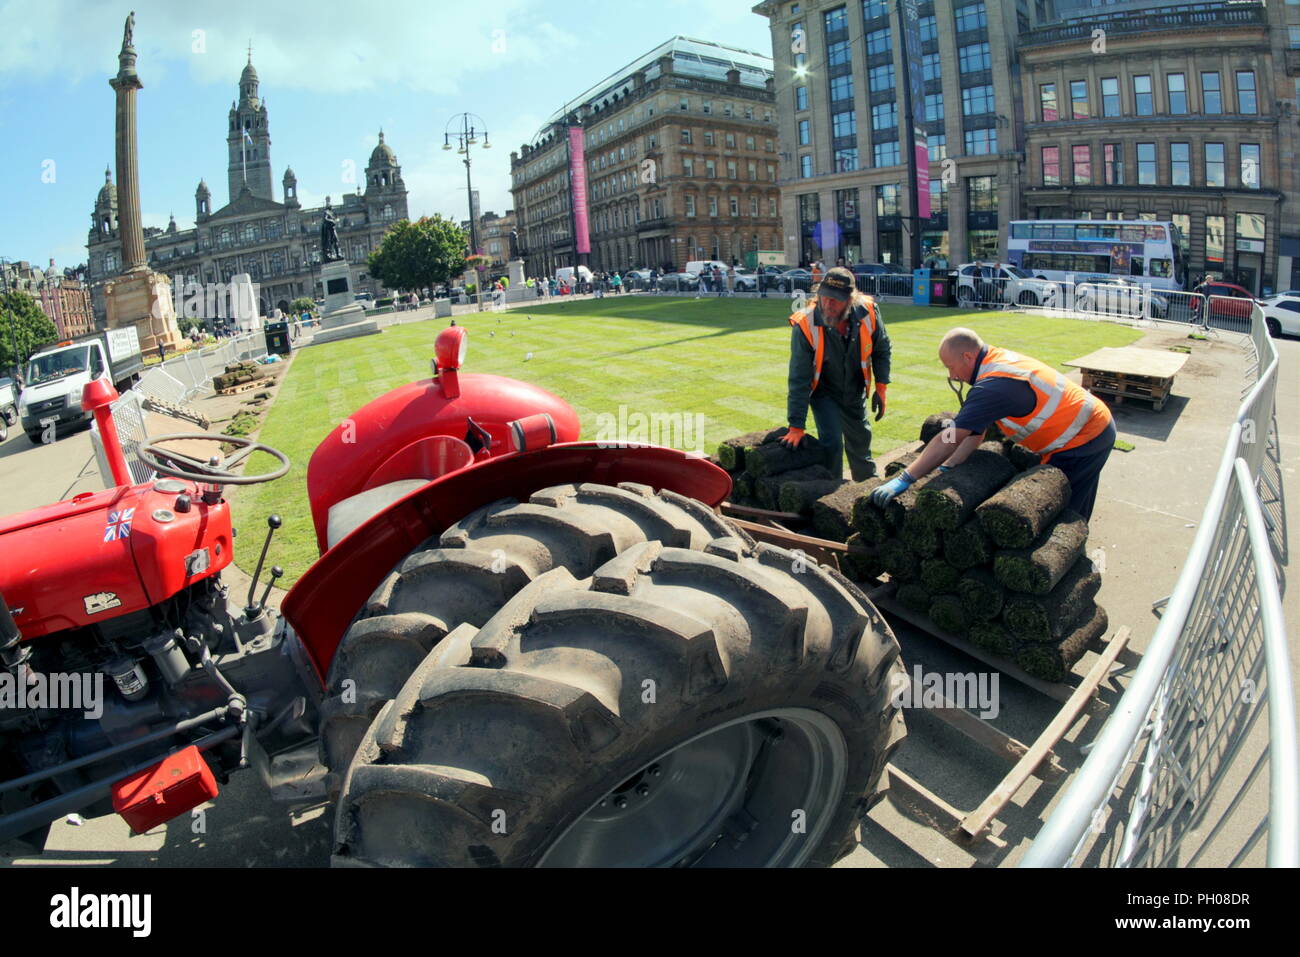 Glasgow, Scotland, UK. 29th  August, 2018. Lunchtime visitors where treated to a bit of living history as a classic  red 1964 Massey Ferguson 35X tractor appeared in the city’s George Square. Locals and tourists watched on as the turf that was lifted for the recent European Championships welcoming centre was replaced. The model sports unusual double wheels to increase traction and was modified by the proud owner pictured. Gerard Ferry/Alamy news Stock Photo